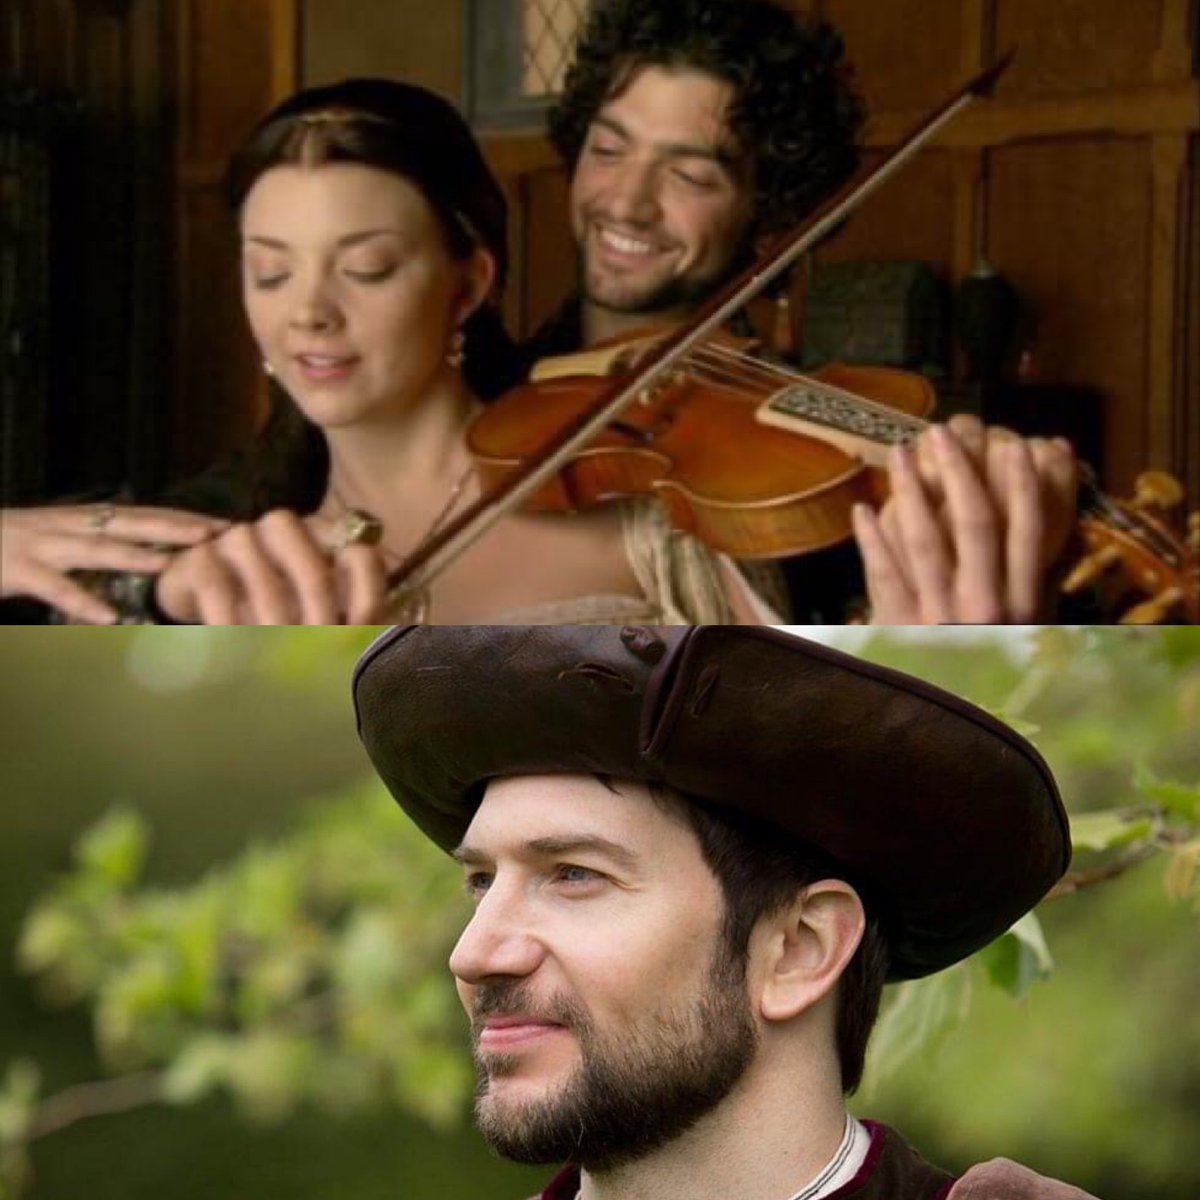 #OTD 30 Apr 1536 A musician #MarkSmeaton was questioned by #ThomasCromwell & he confessed to a sexual relationship with #AnneBoleyn The previous day she had said to #HenryNorris “You look for dead men's shoes, for if aught came to the King but good you would look to have me” 1/2